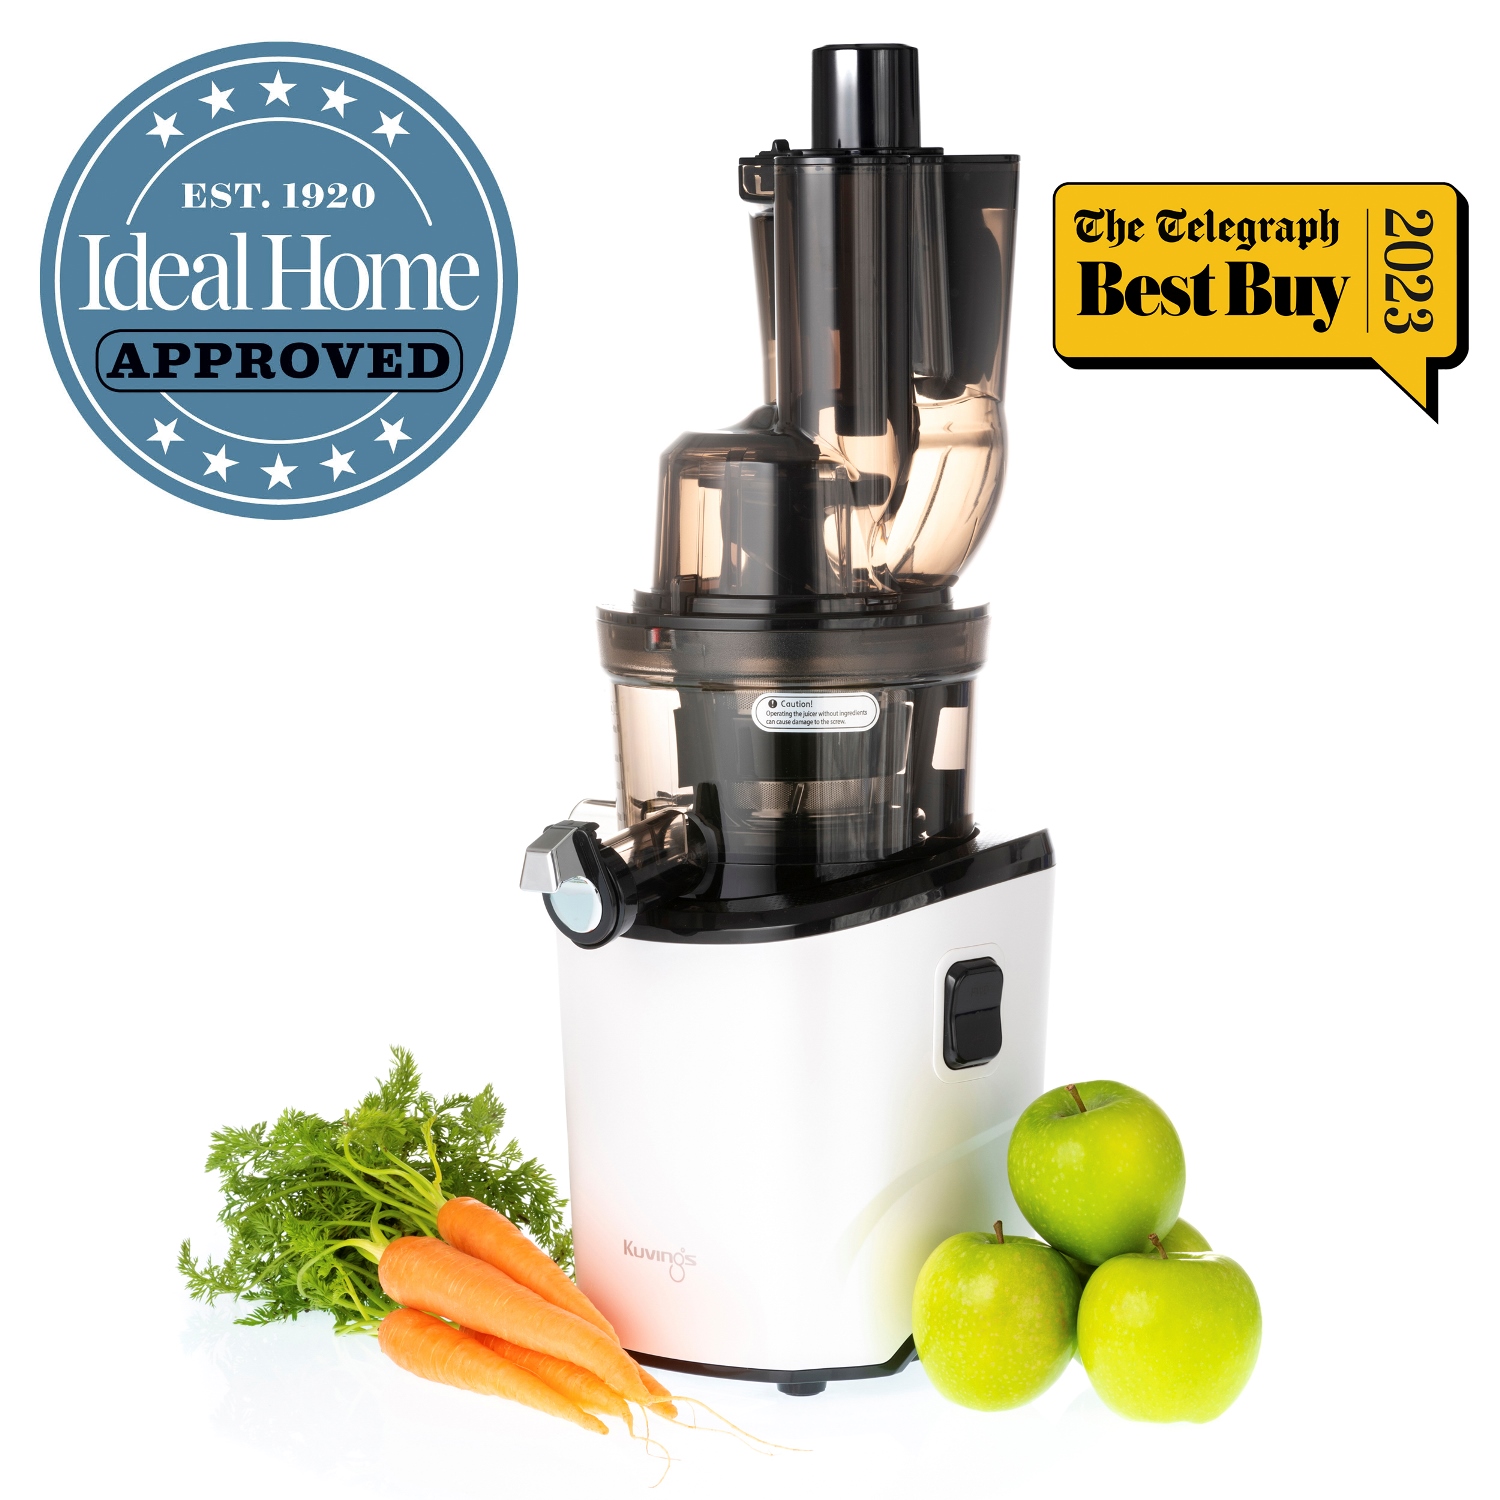 Kuvings REVO830 Cold Press Juicer White with Awards